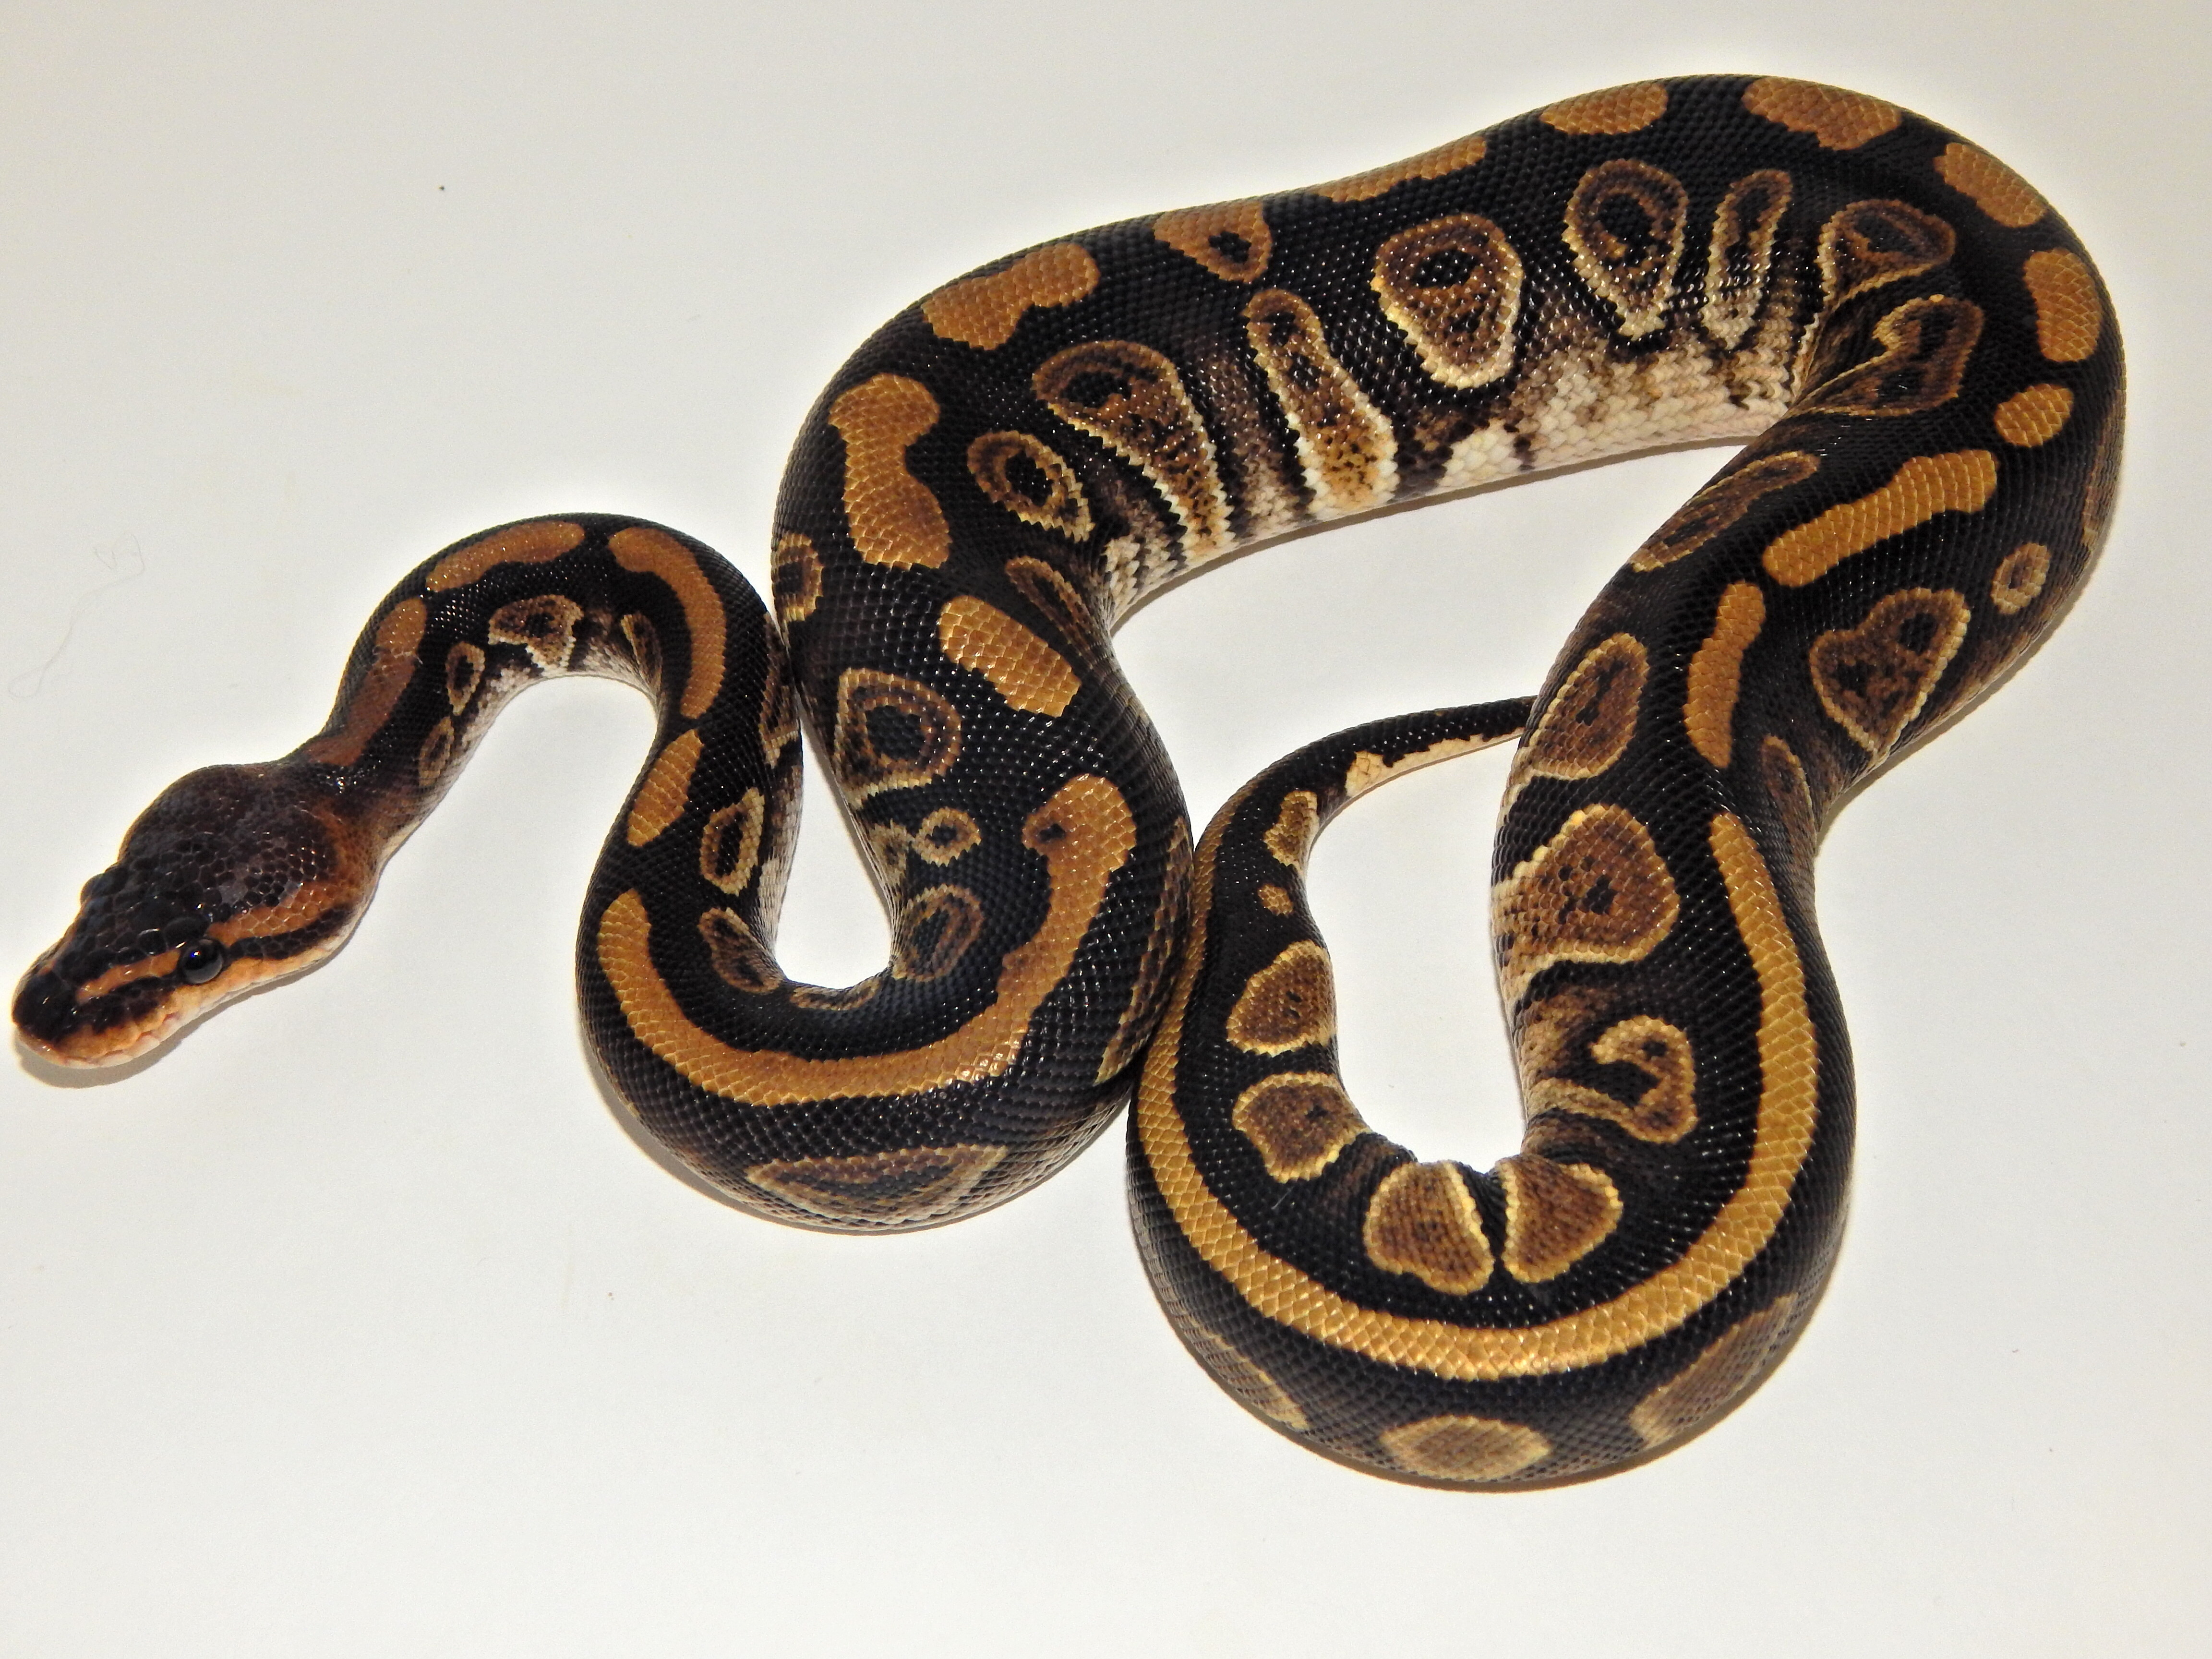 Wookie Ball Python by Uncle Joes Ball Pythons